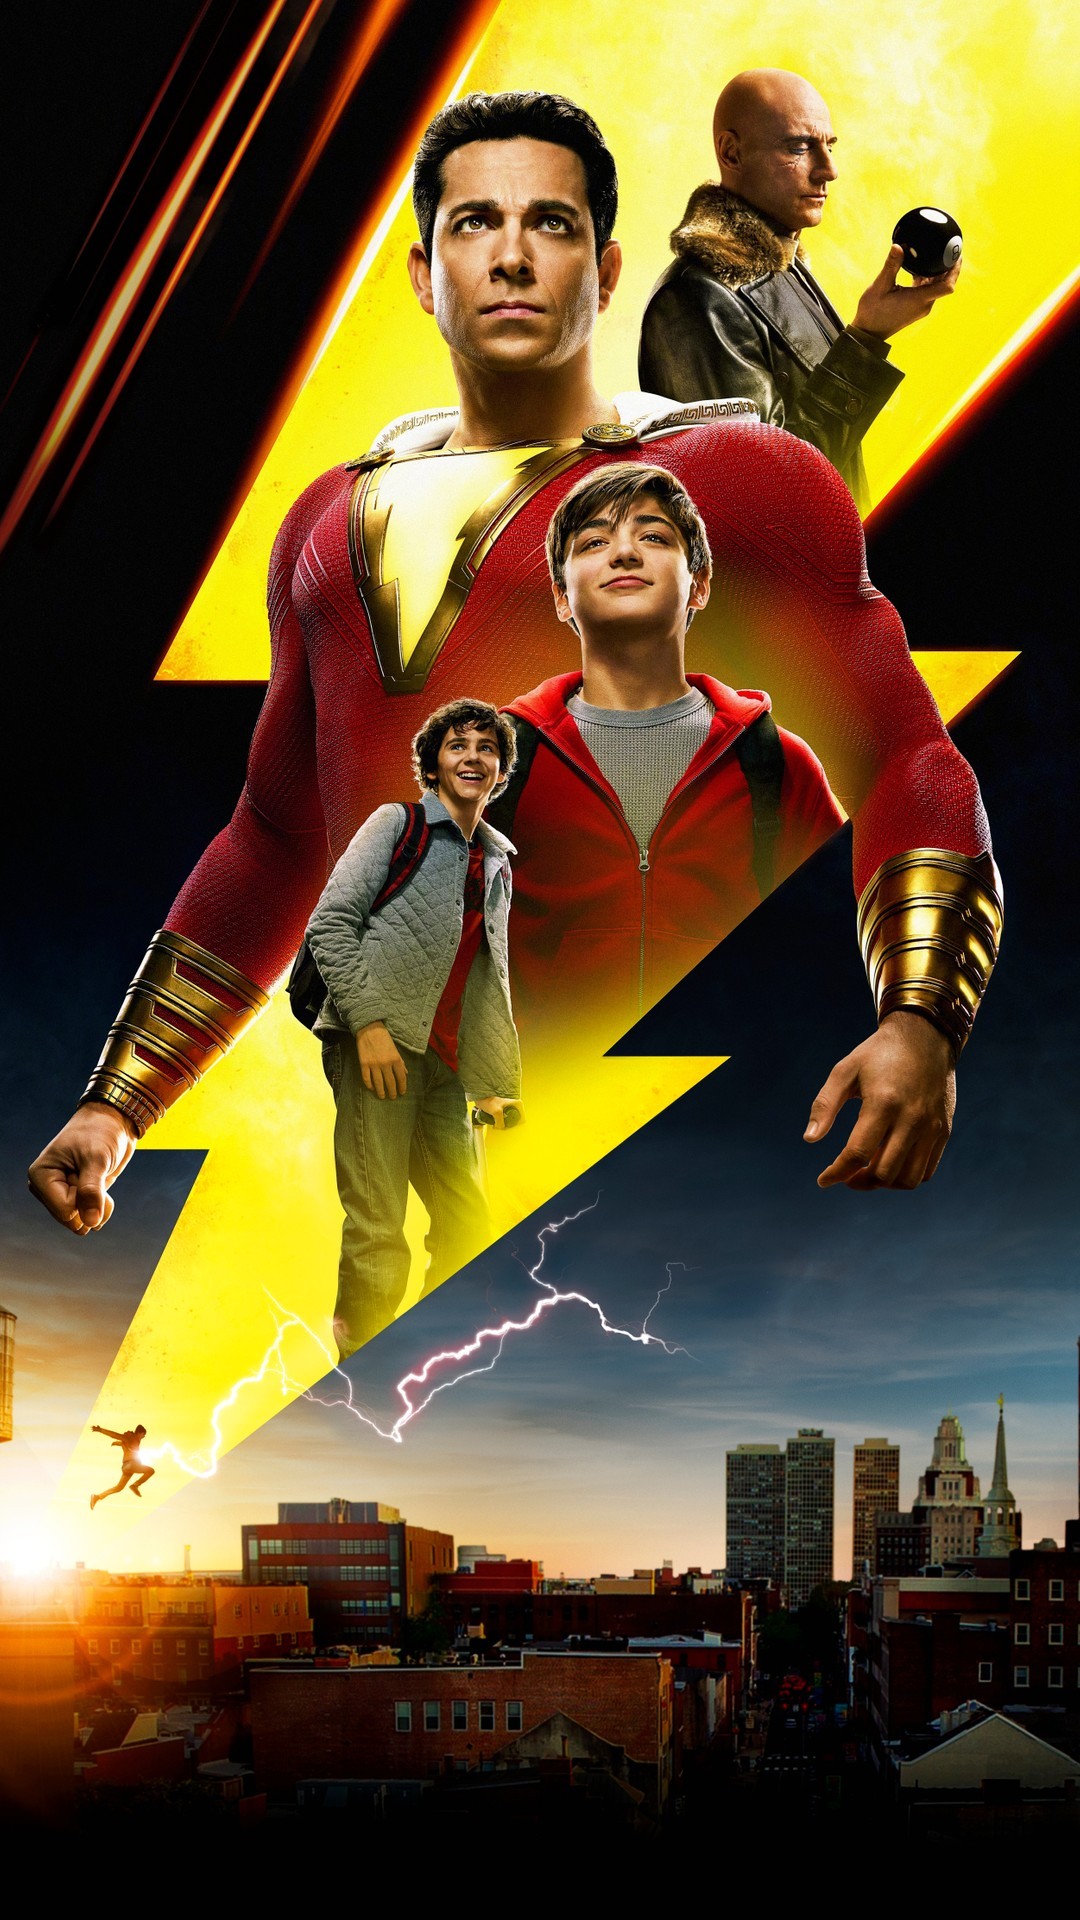 Download - Shazam Movie Poster Hd , HD Wallpaper & Backgrounds